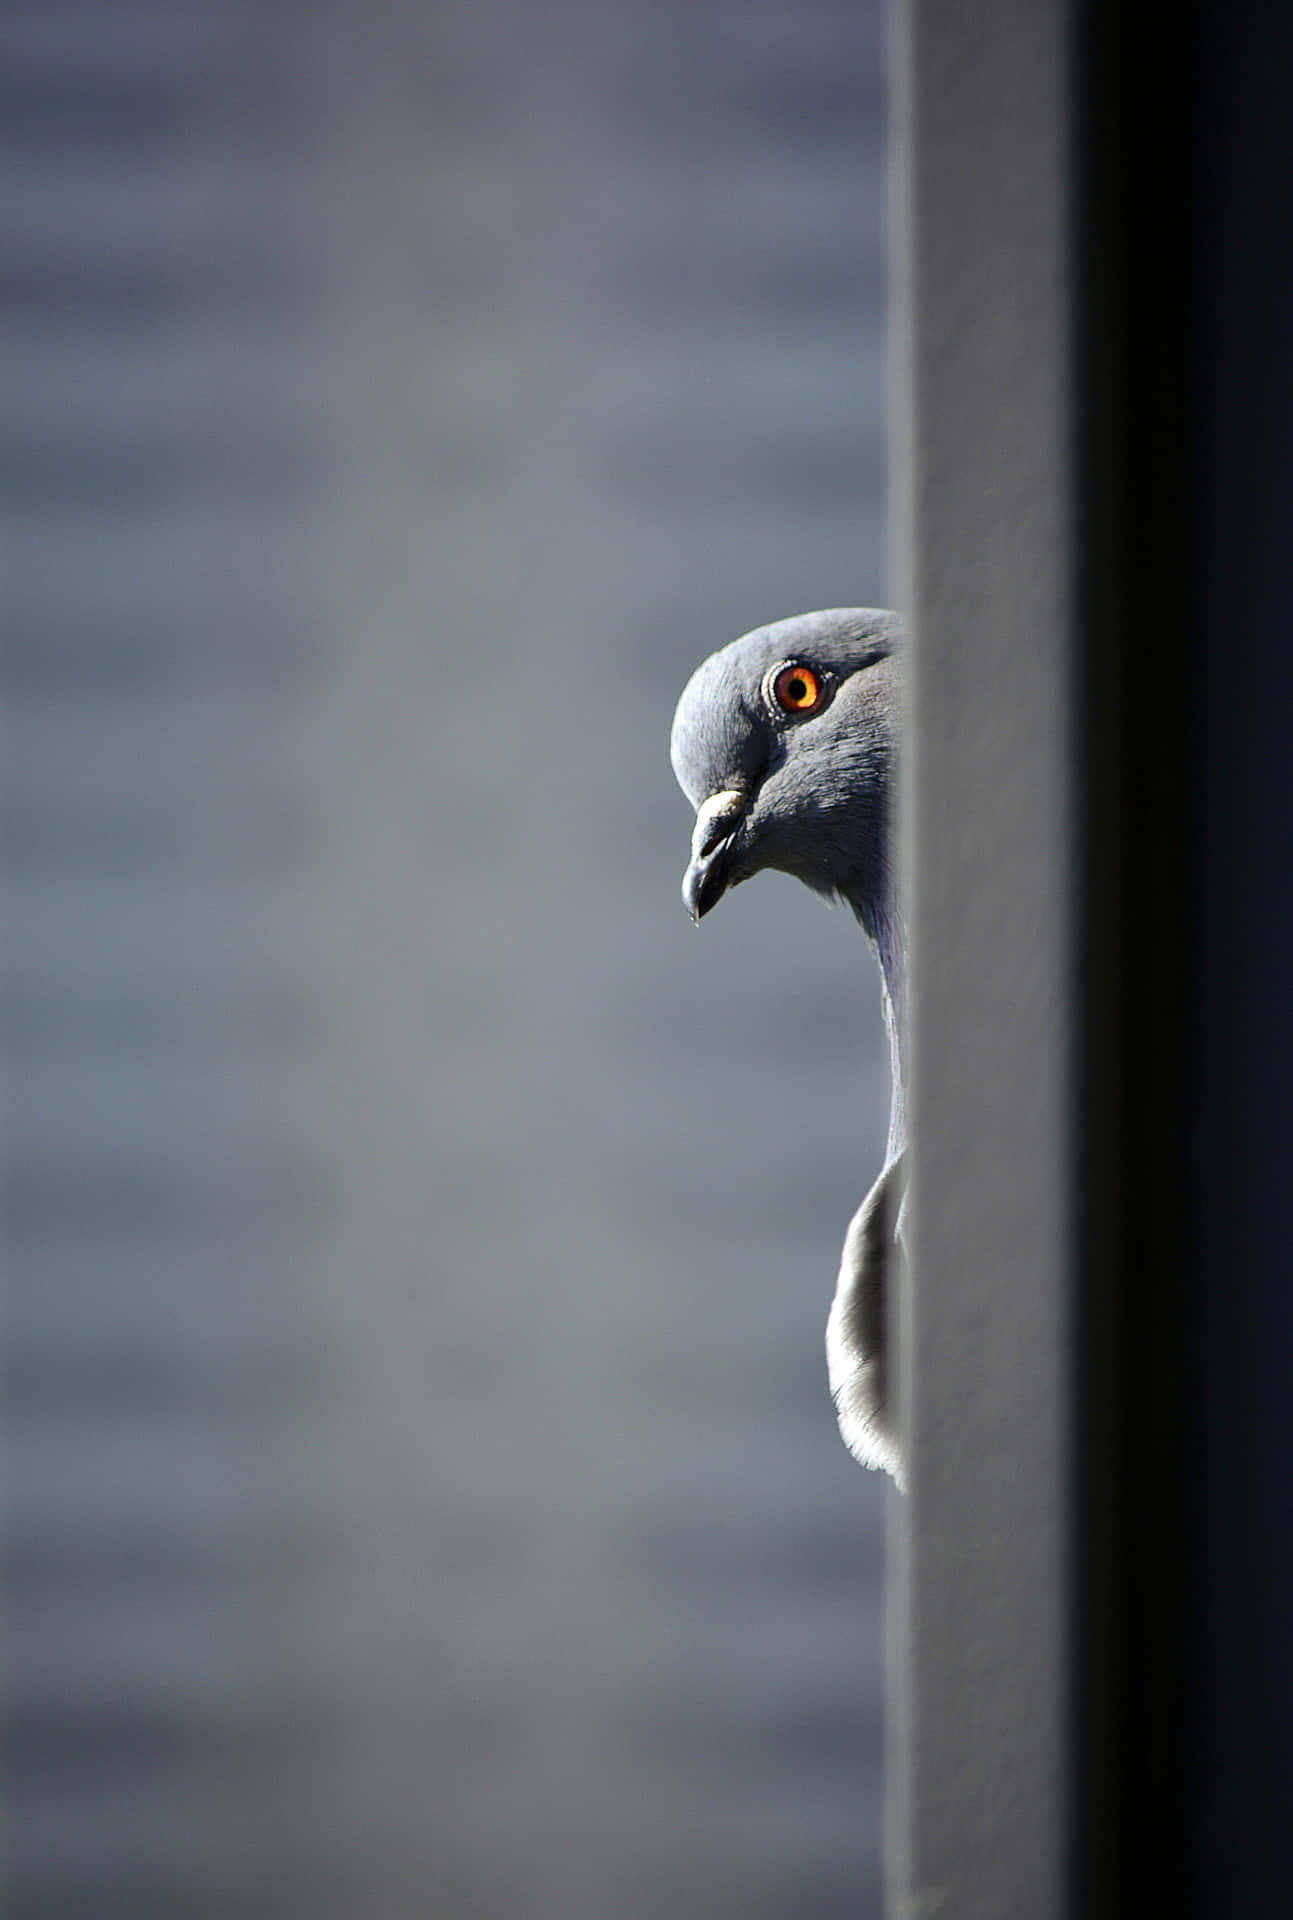 A Gray Pigeon Peeking Out Of A Wall